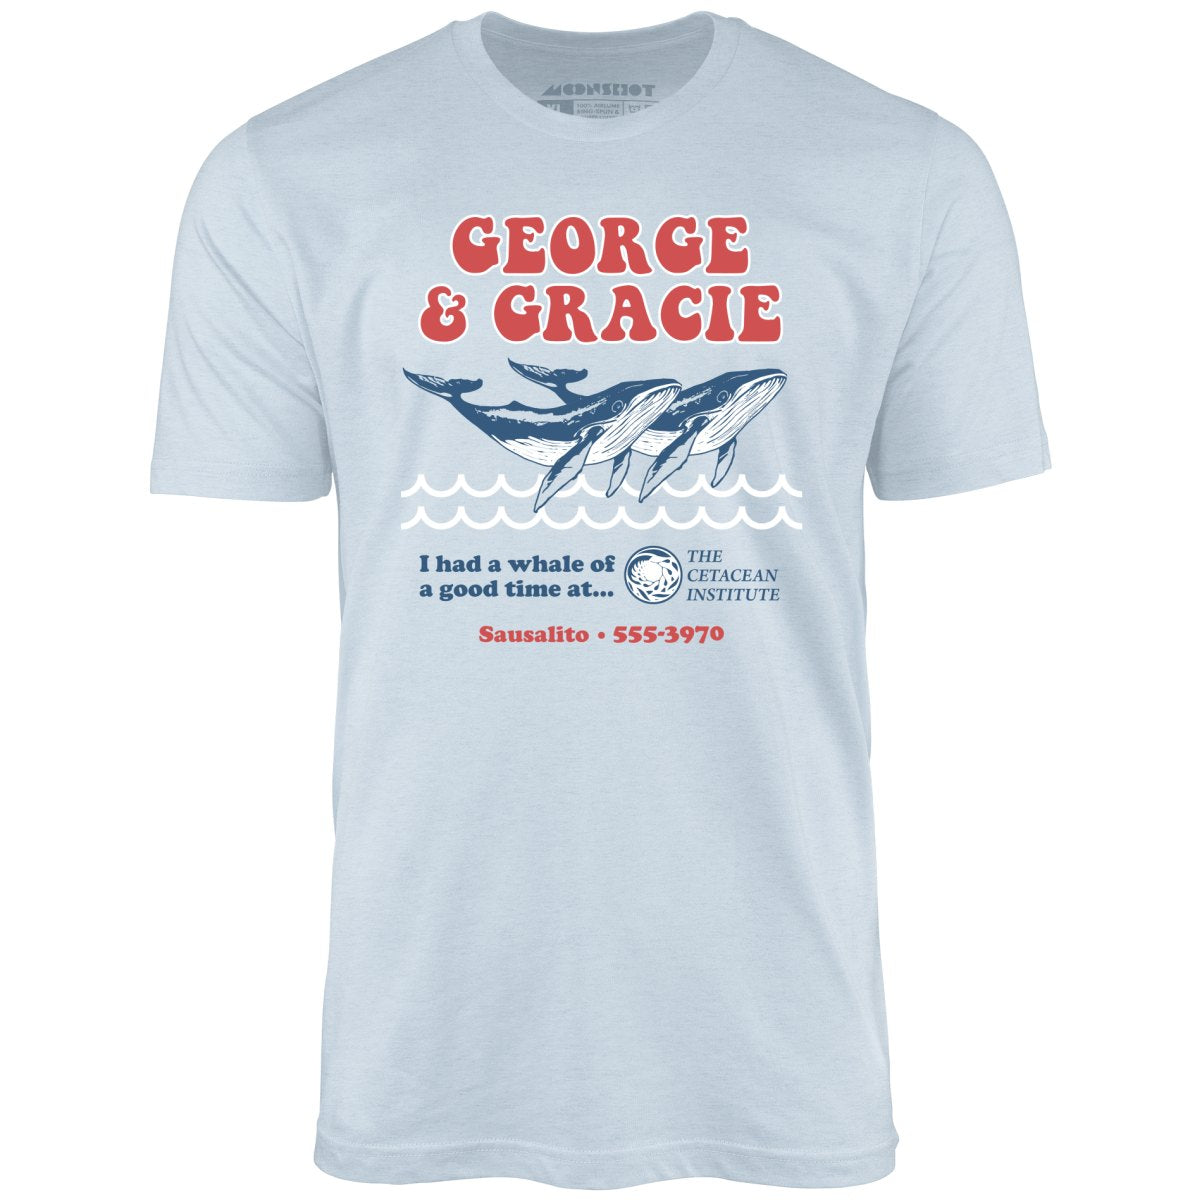 George and Gracie - Unisex T-Shirt